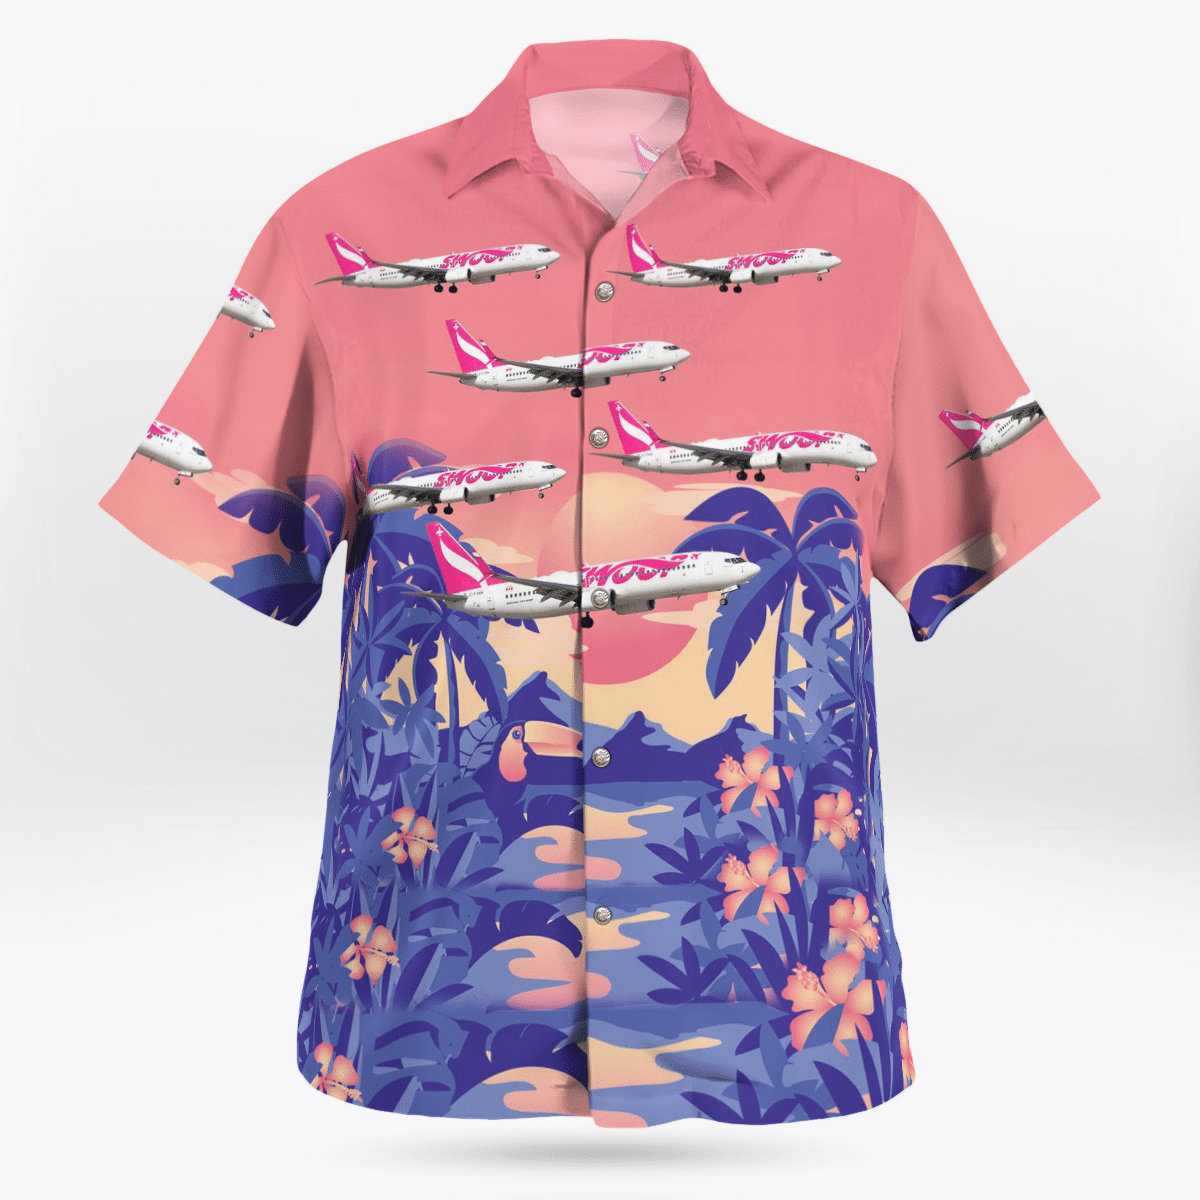 HOT Swoop airline Boeing 737-8CT Tropical Shirt1